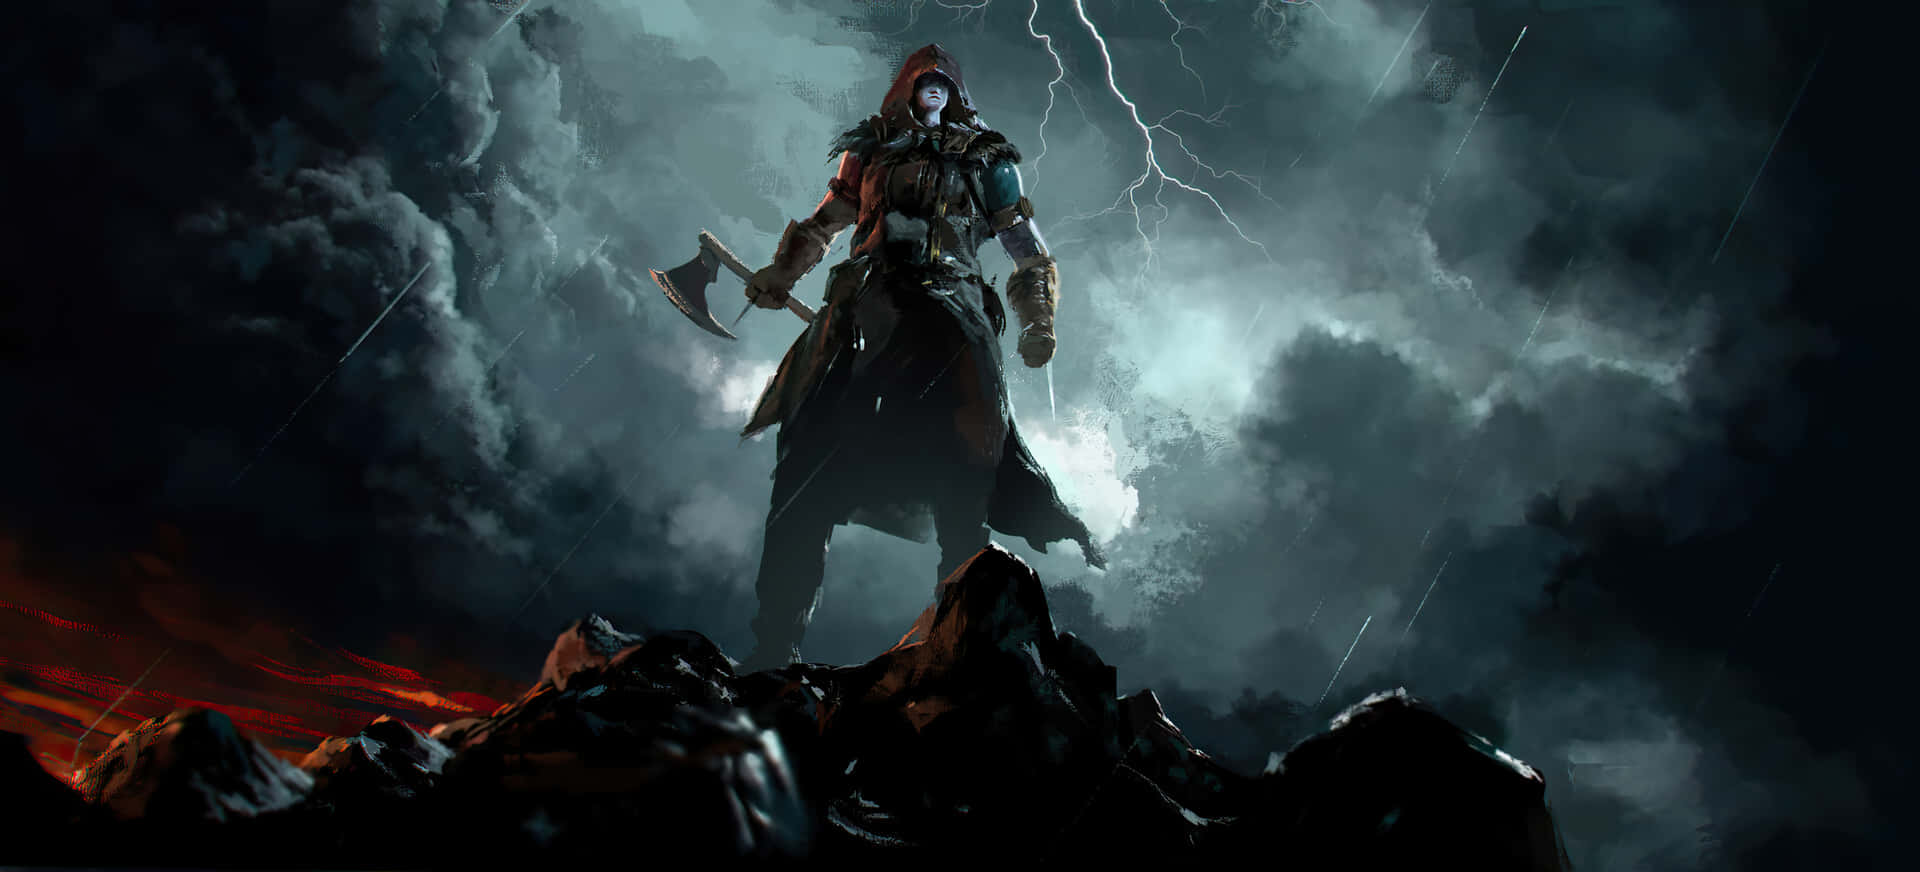 A Man Standing On A Mountain With Lightning Wallpaper